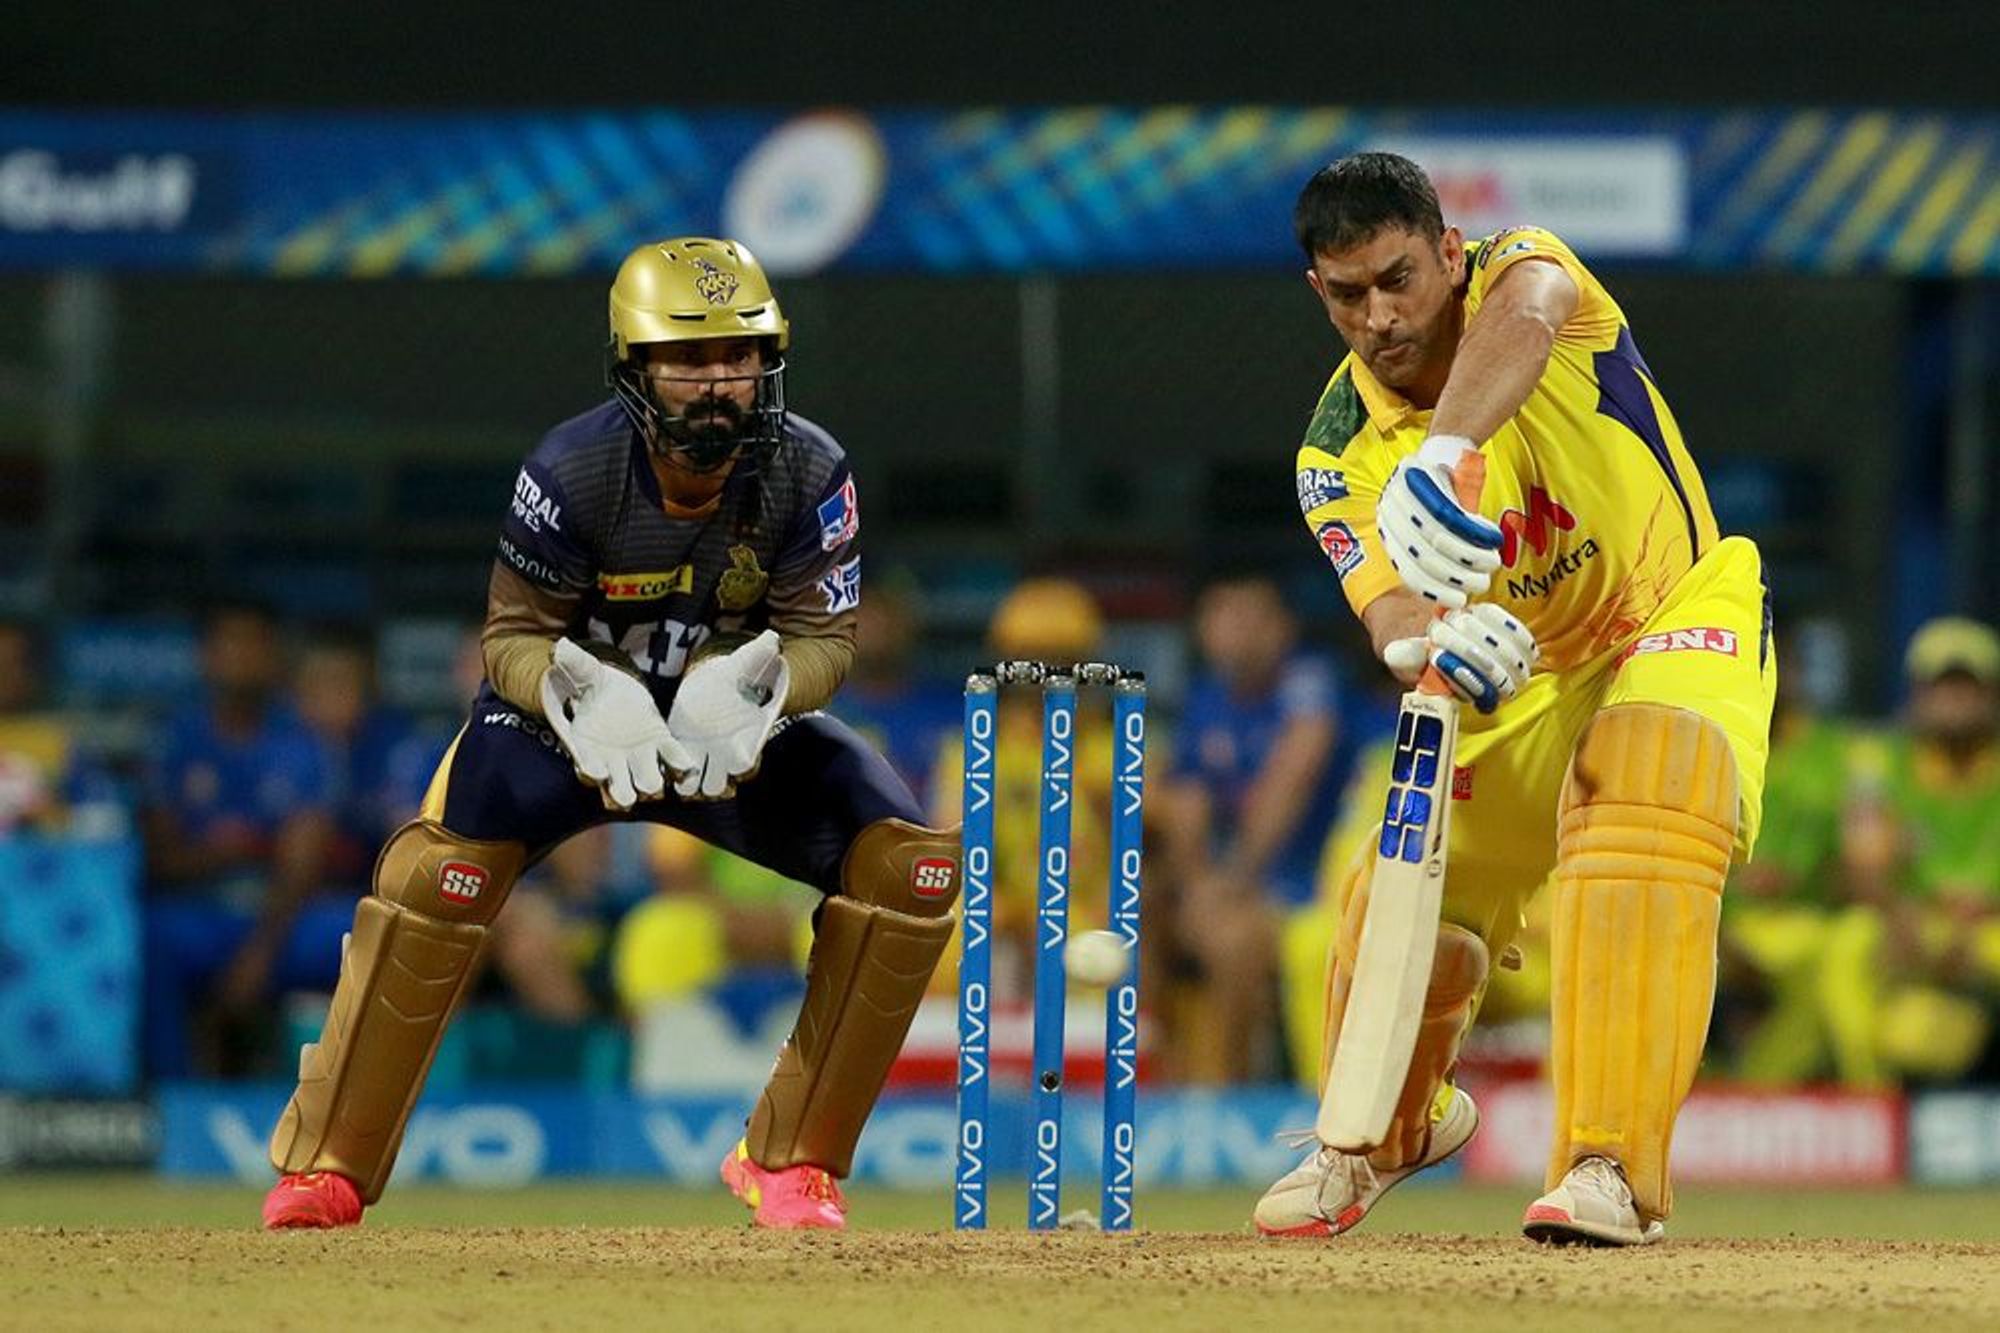 MS Dhoni hit 17 from just 8 balls against KKR | BCCI/IPL